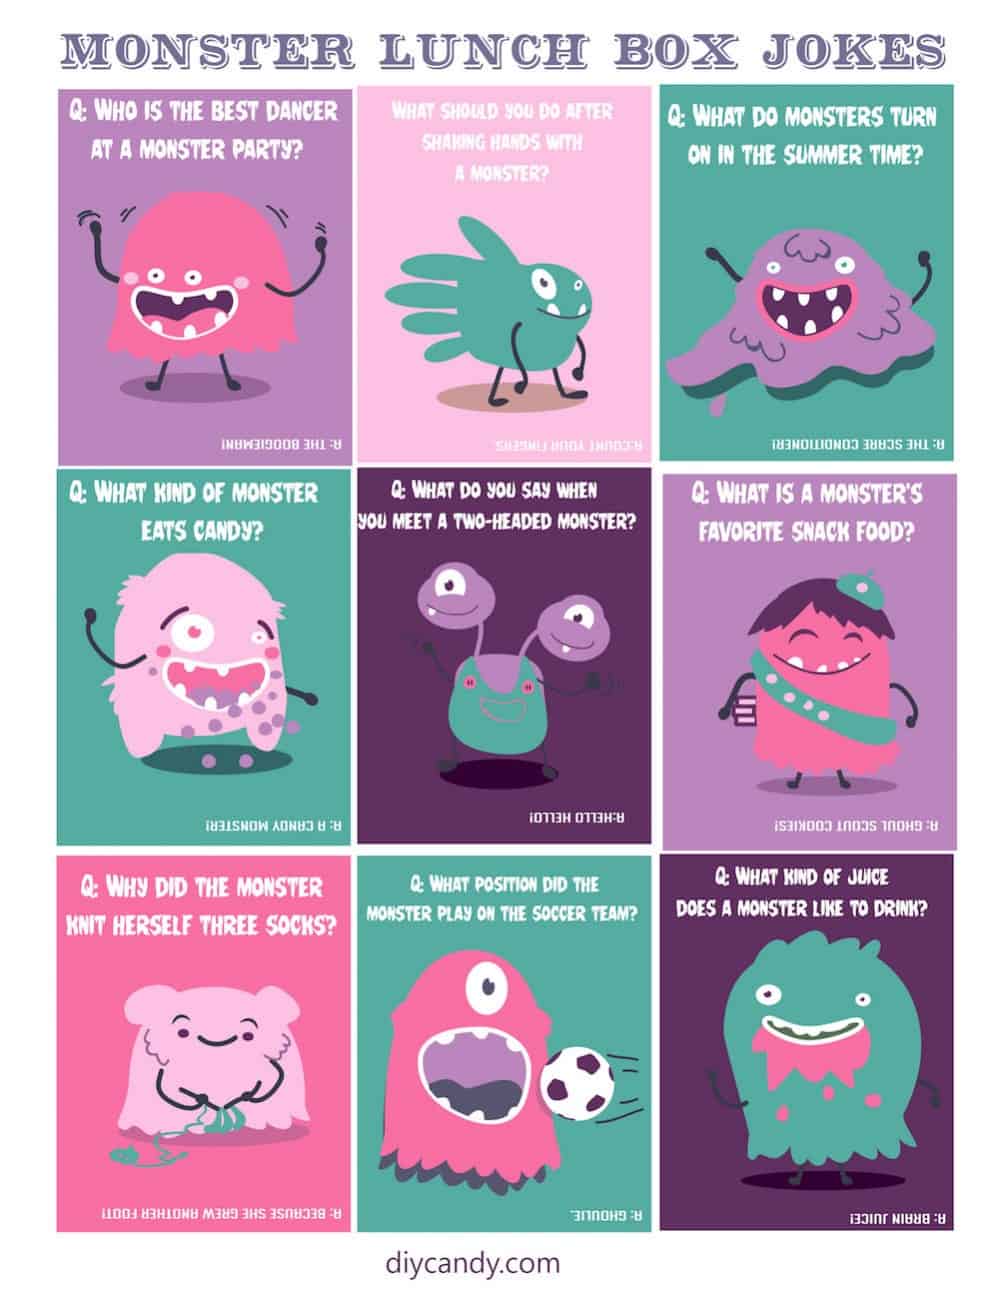 Cute lunch box jokes with a monster theme